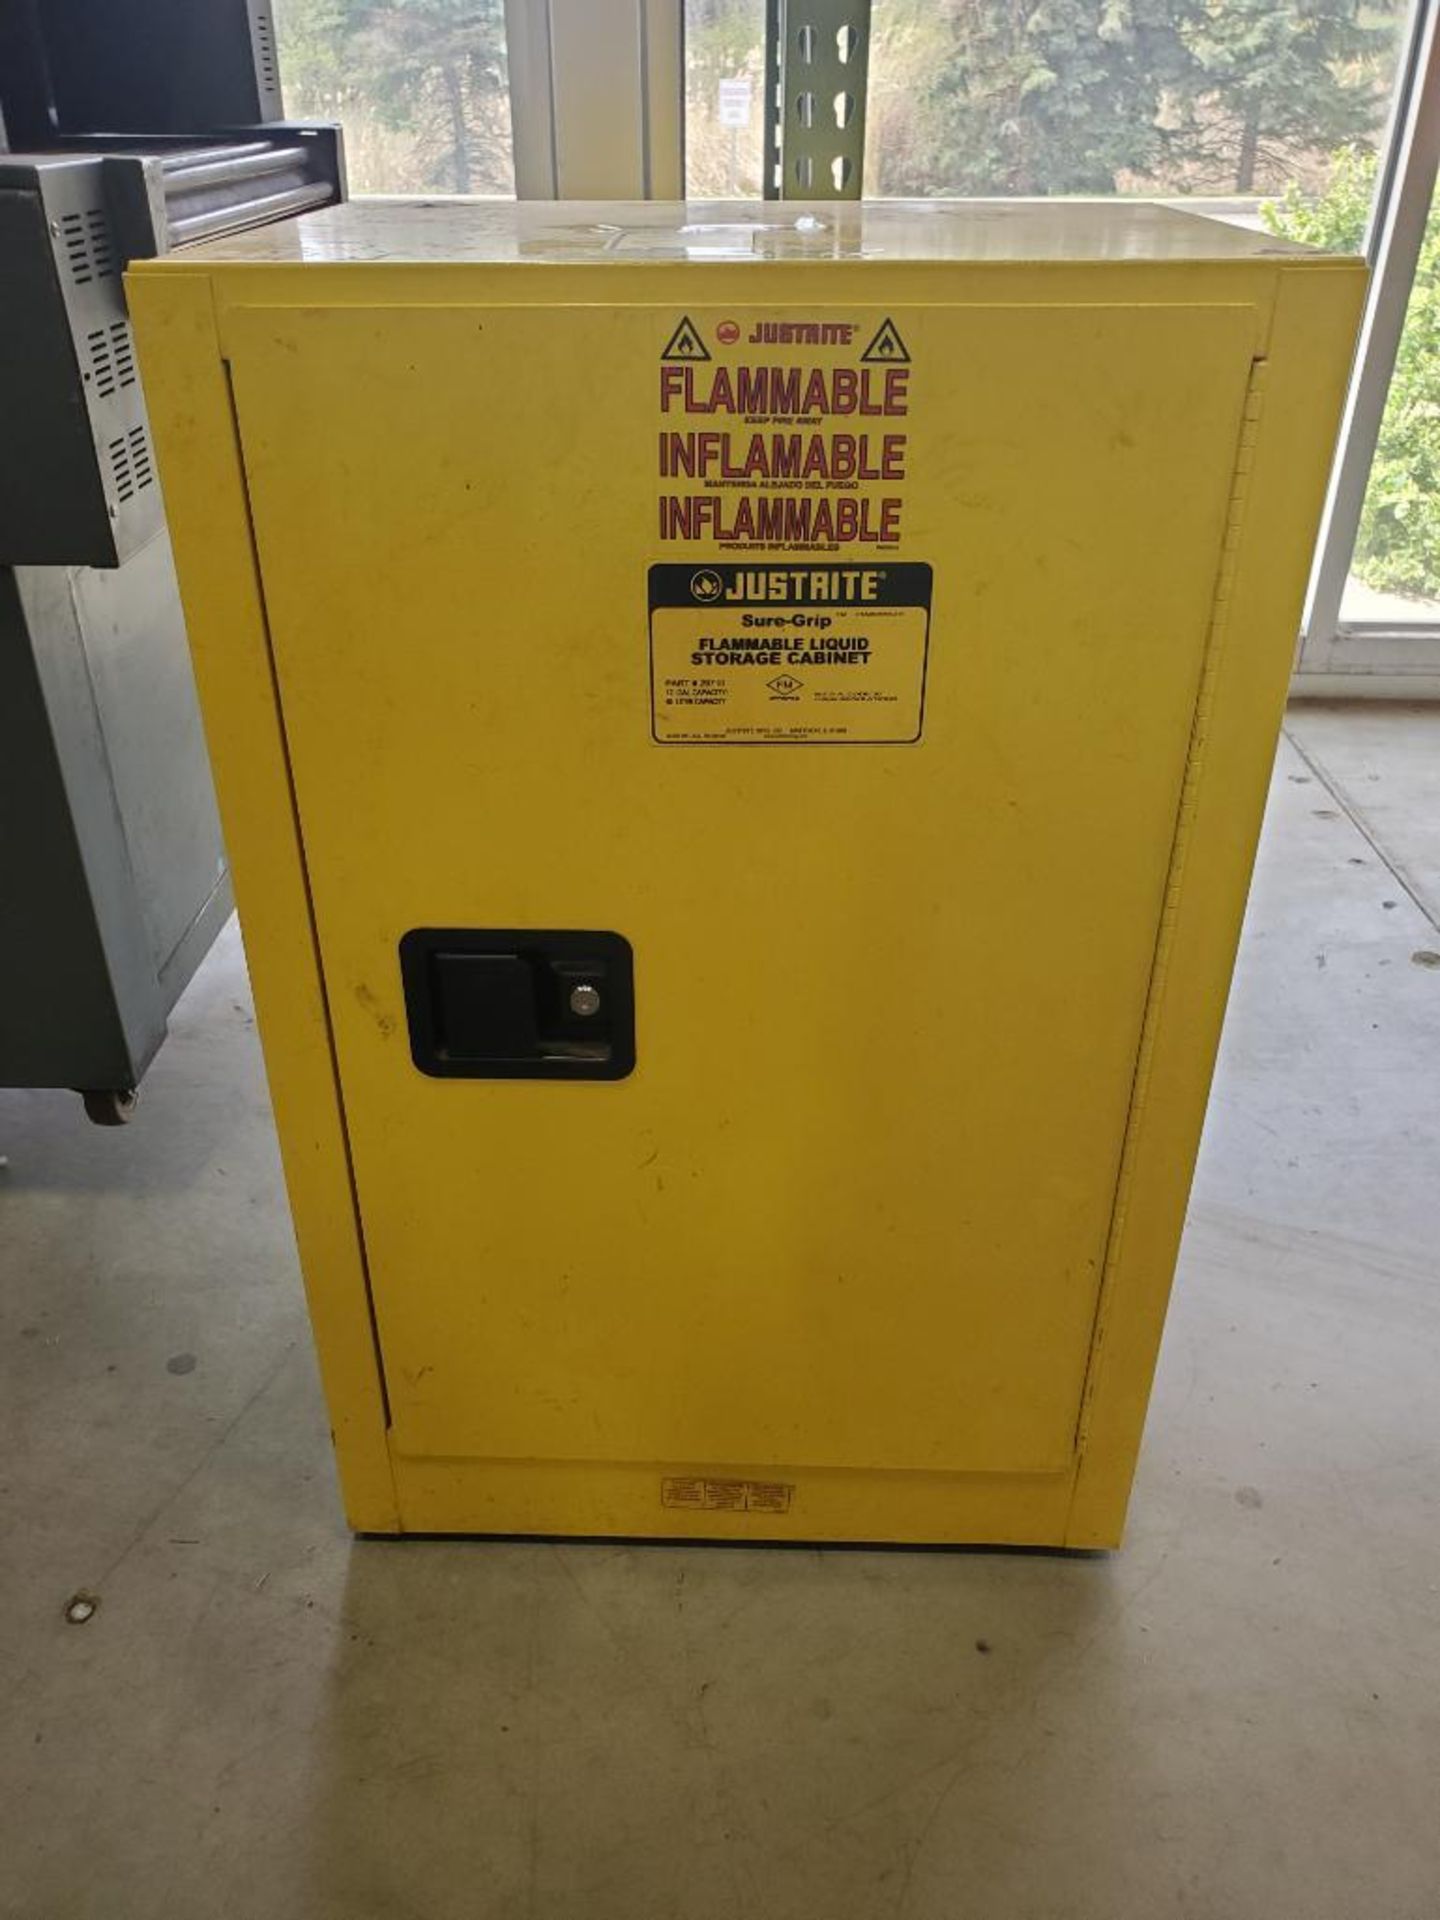 JUSTRITE SURE GRIP FLAMMABLE STORAGE CABINET; 12-GALLON CAPACITY ***LOCATED AT 12850 DARICE PARKWAY,